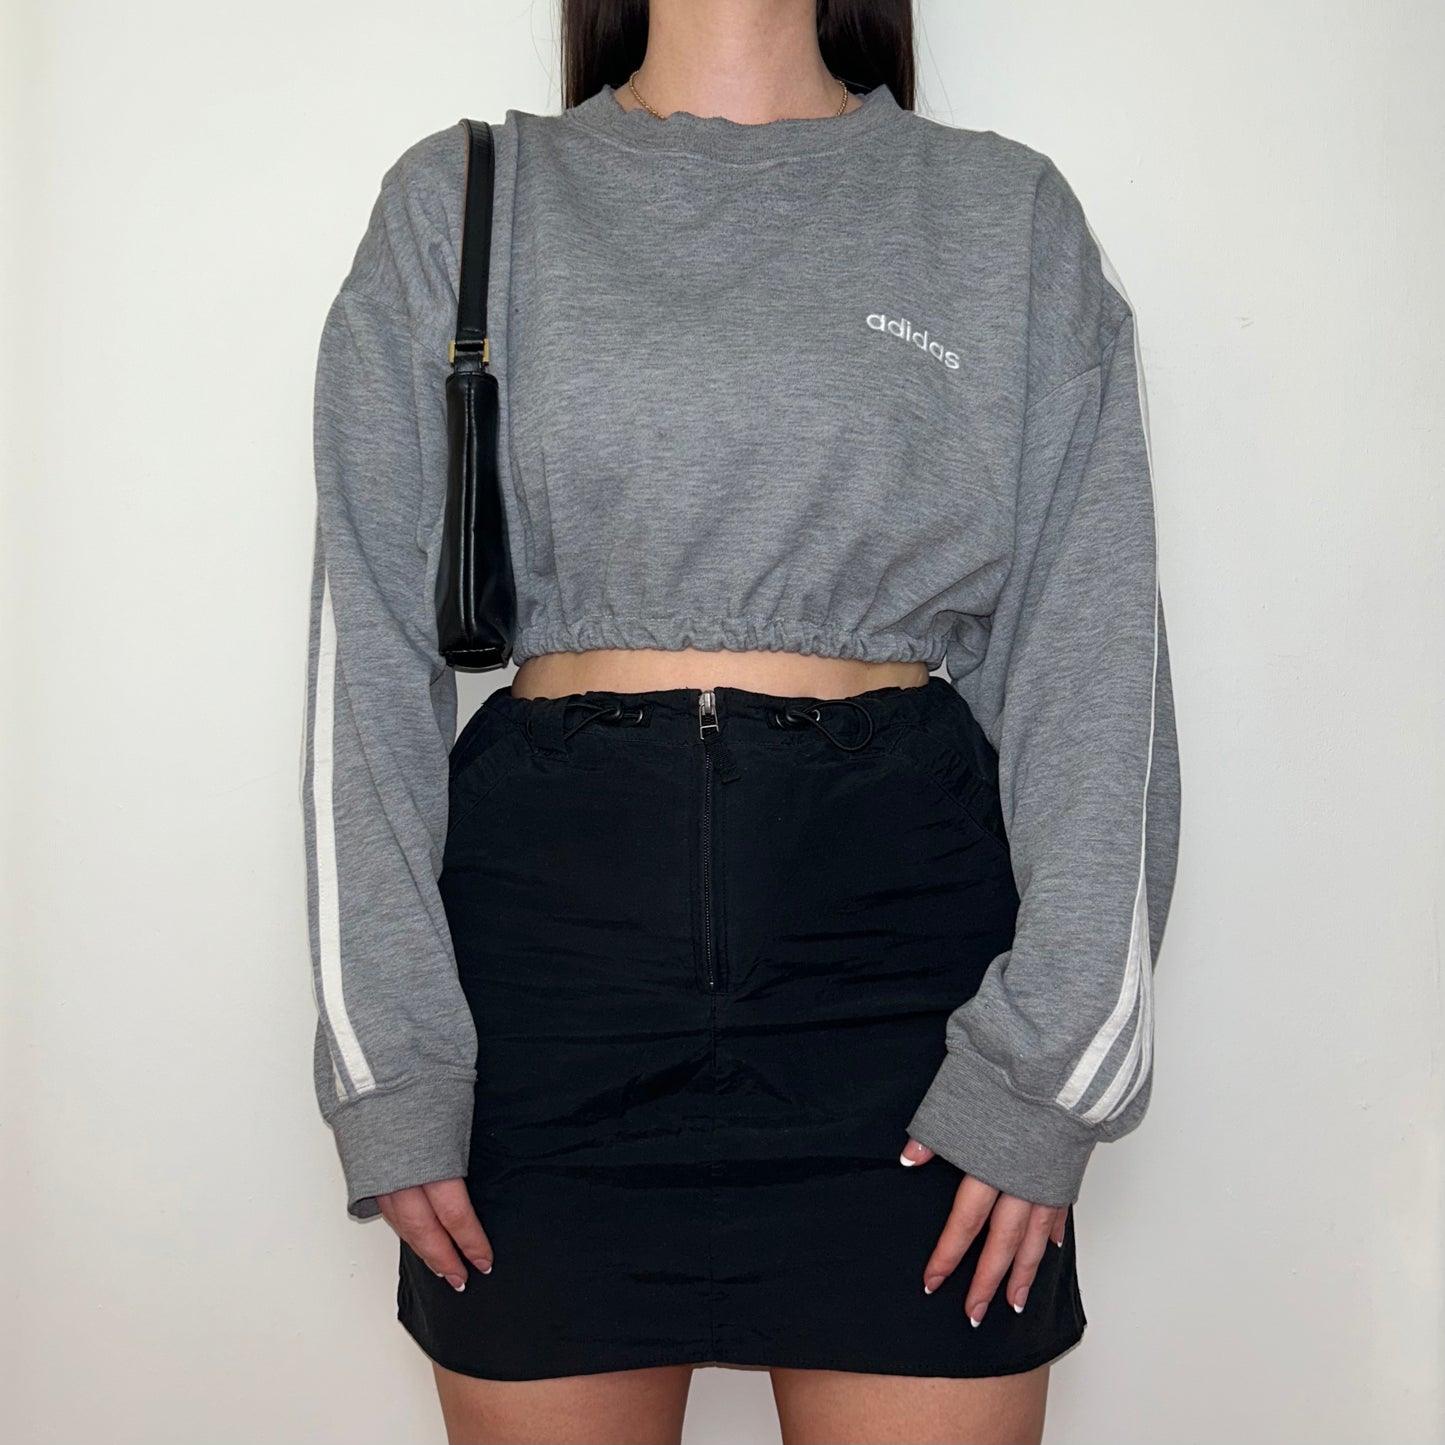 grey cropped sweatshirt with white adidas logo shown on a model wearing a black mini skirt and black shoulder bag